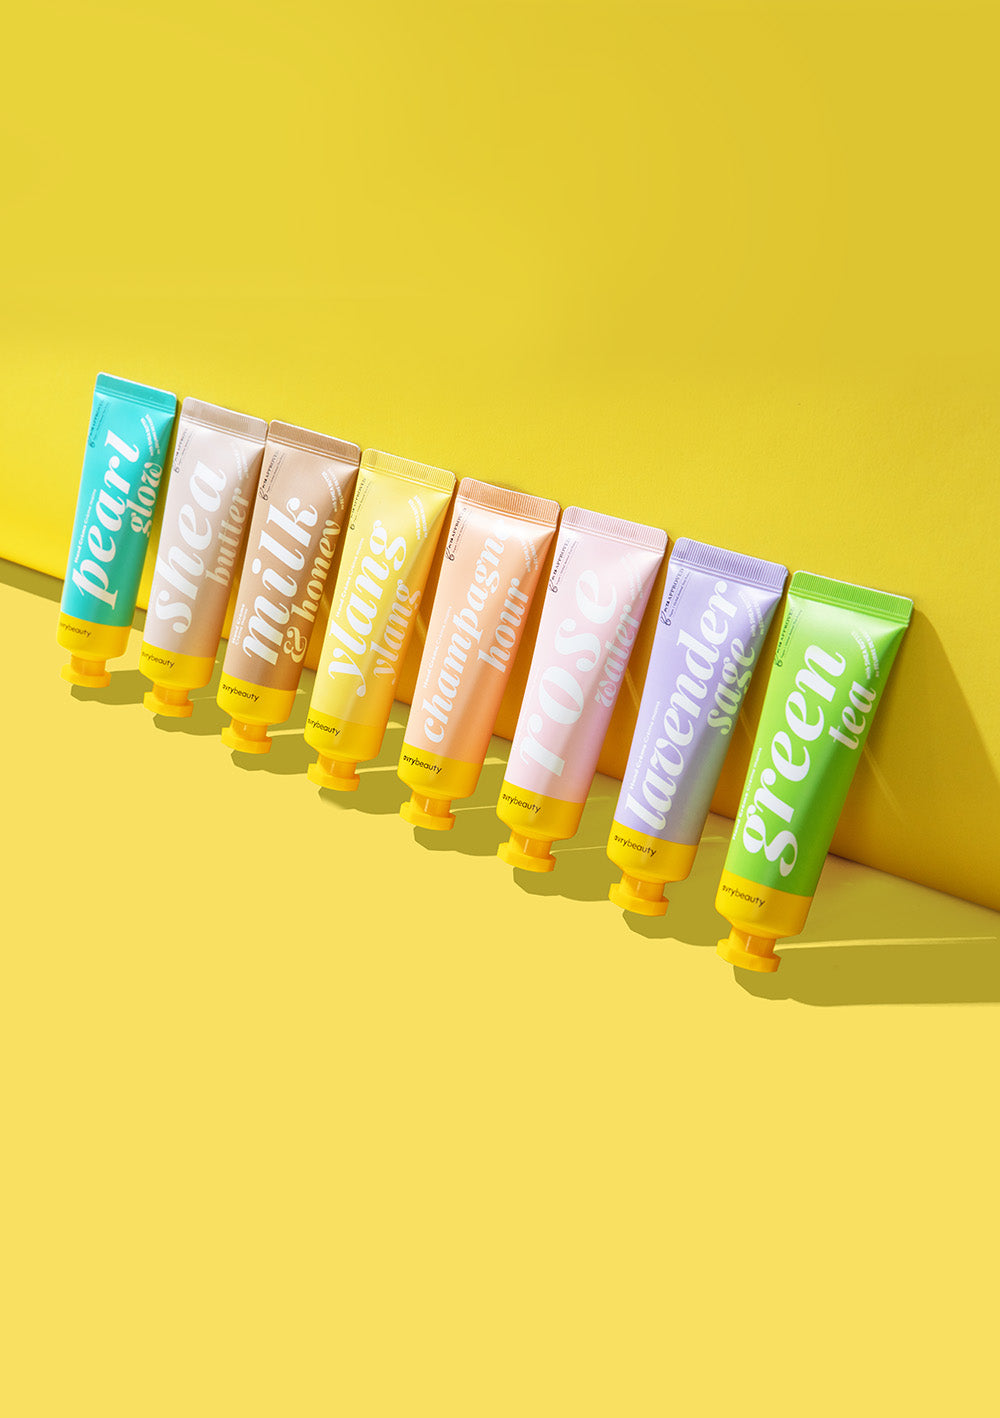 Assorted lineup of Shea Butter Lotions against a vibrant yellow backdrop.